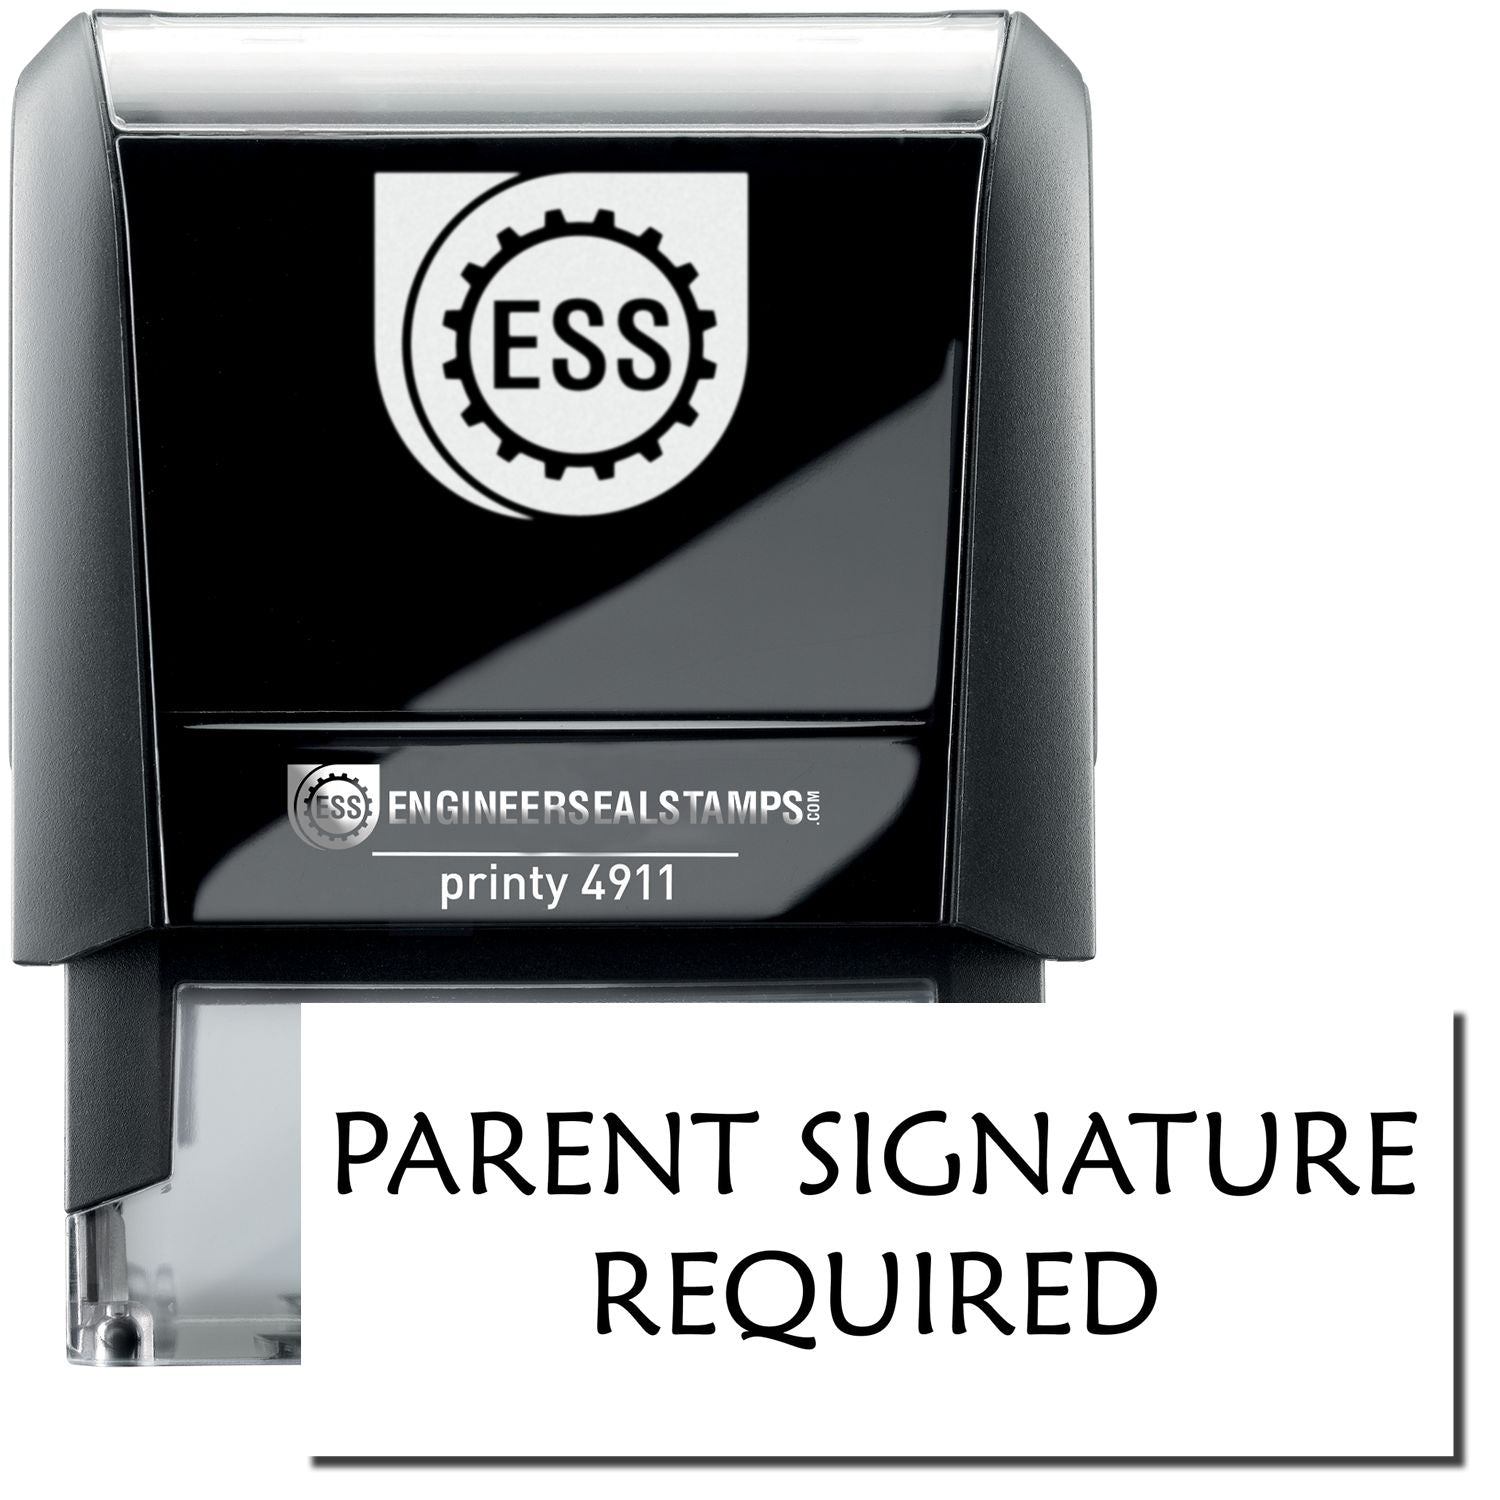 A self-inking stamp with a stamped image showing how the text "PARENT SIGNATURE REQUIRED" is displayed after stamping.